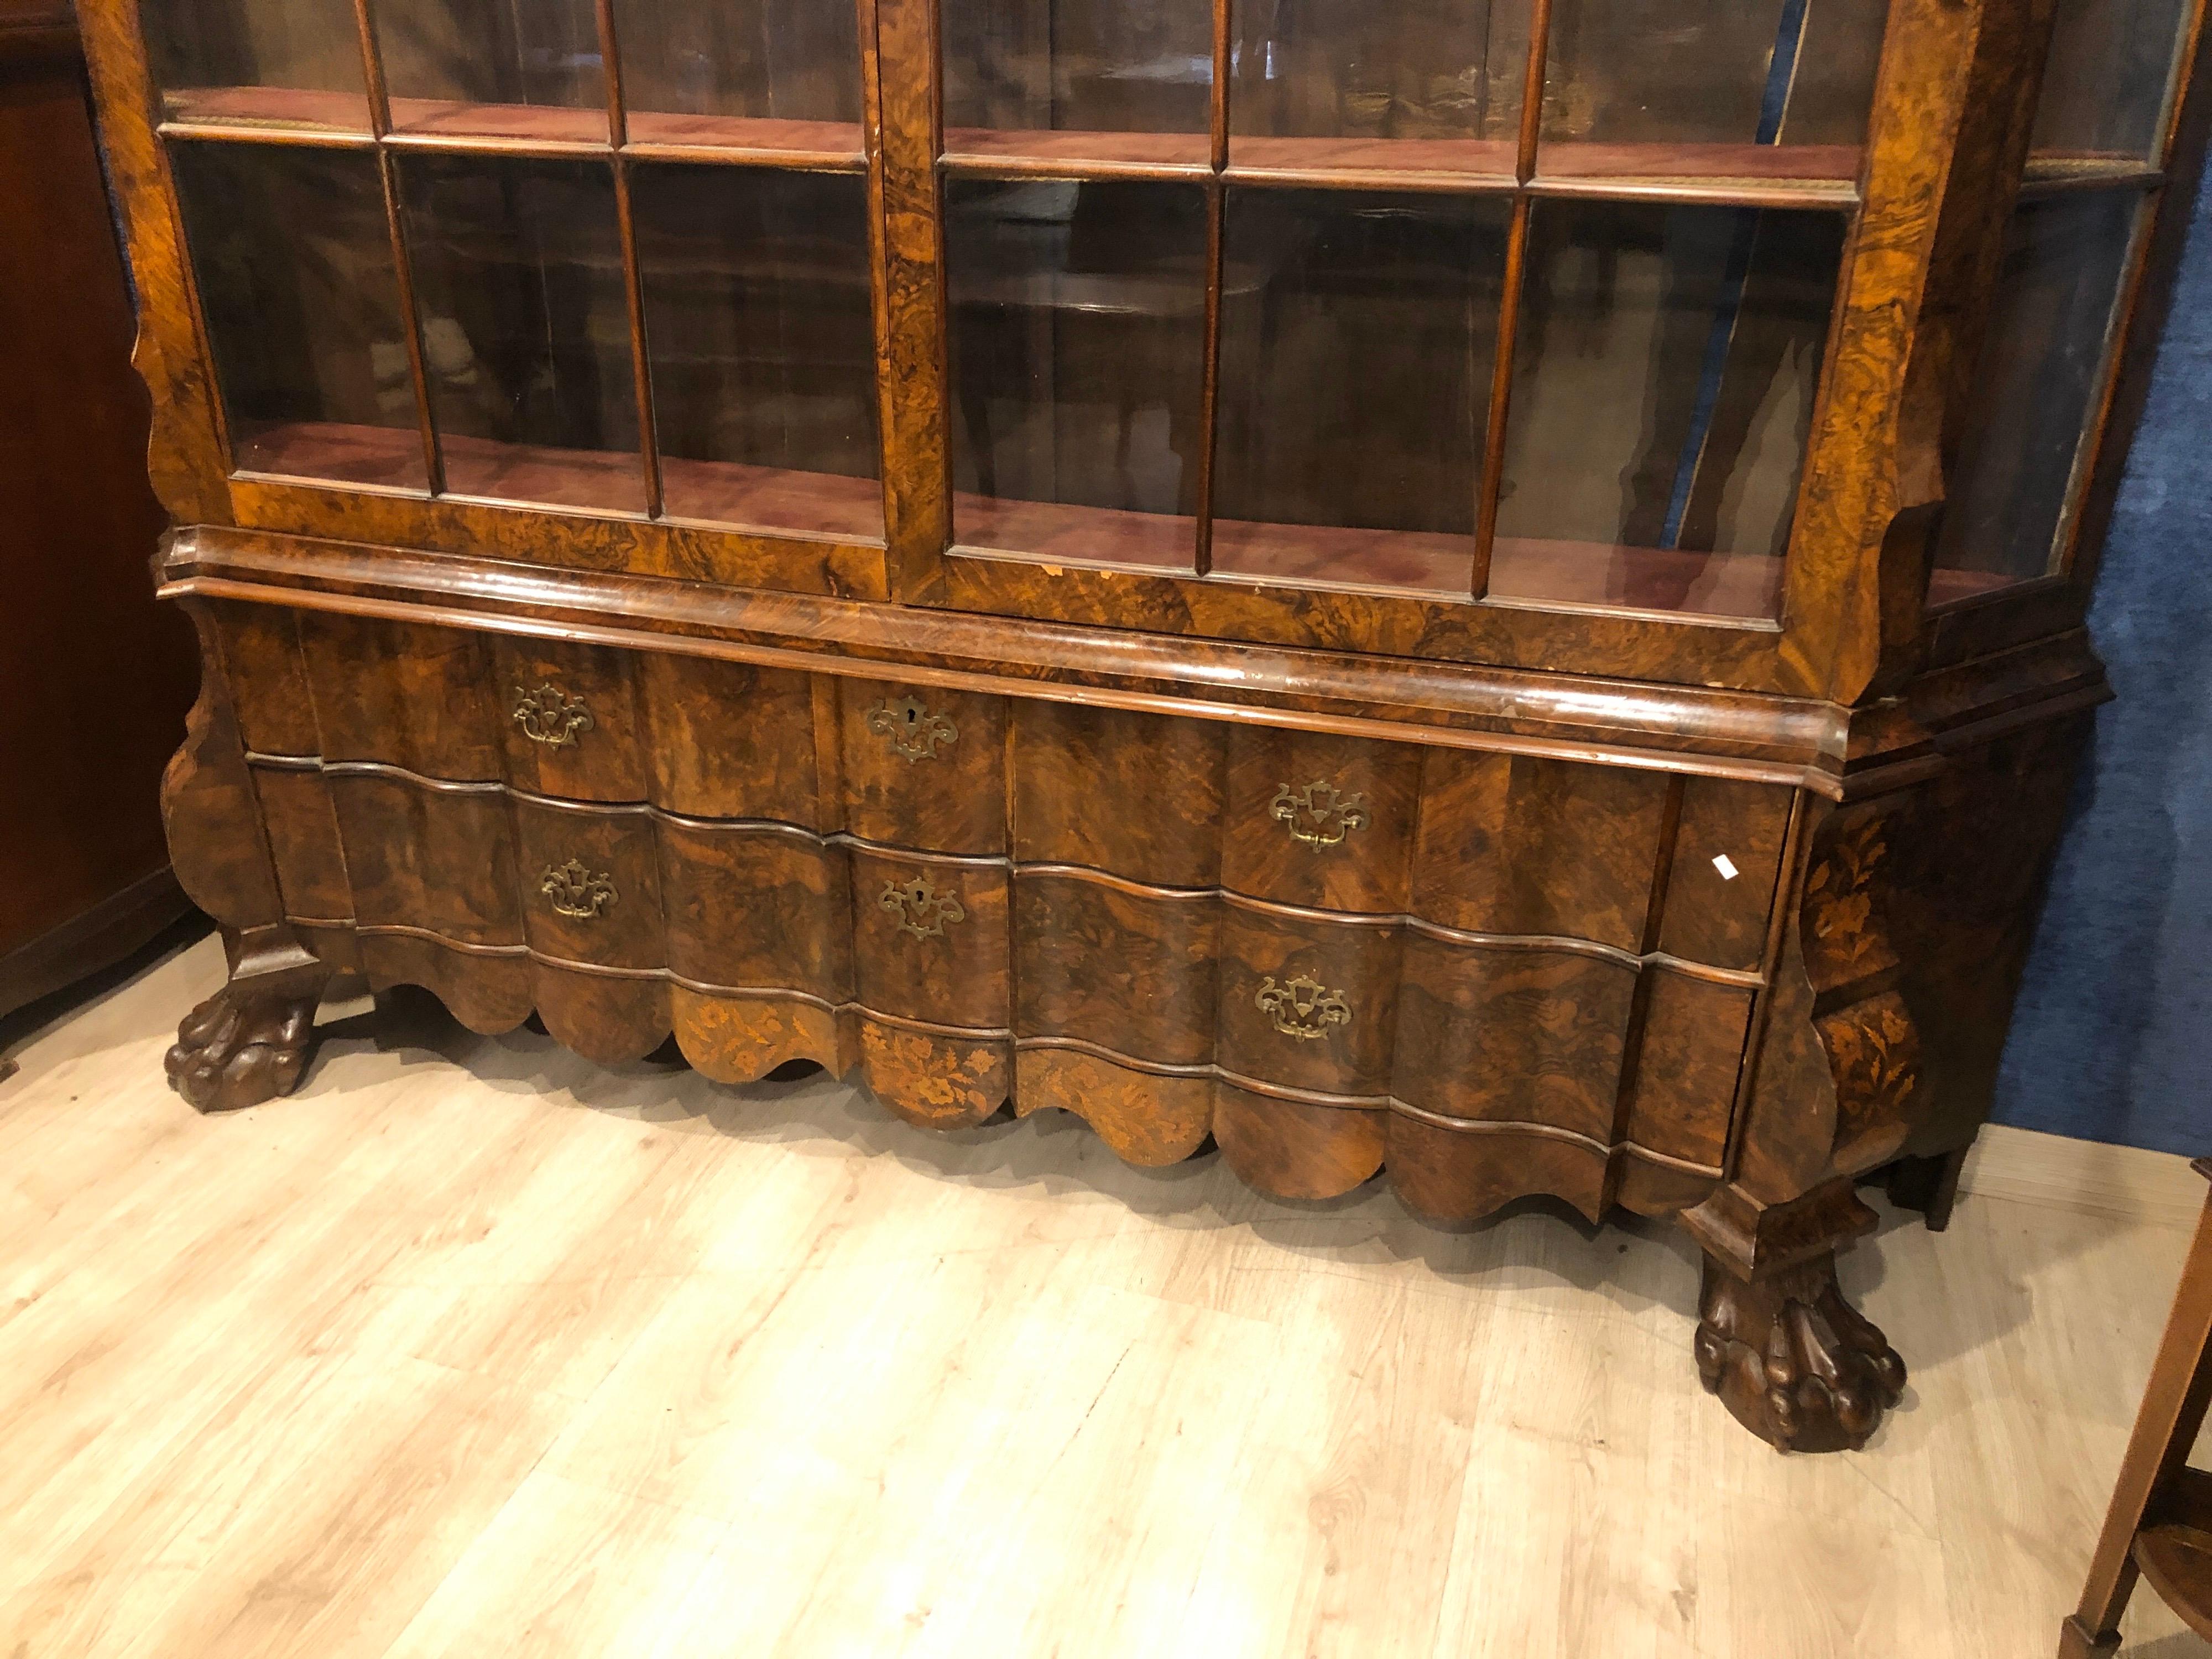 Dutch furniture of great value, moved on the front of the drawers, delicate inlay on only some parts of the furniture, Charles X era (circa 1830) but in Louis XVI style, in walnut briar wood, to be restored and some glasses are damaged. Imagine it